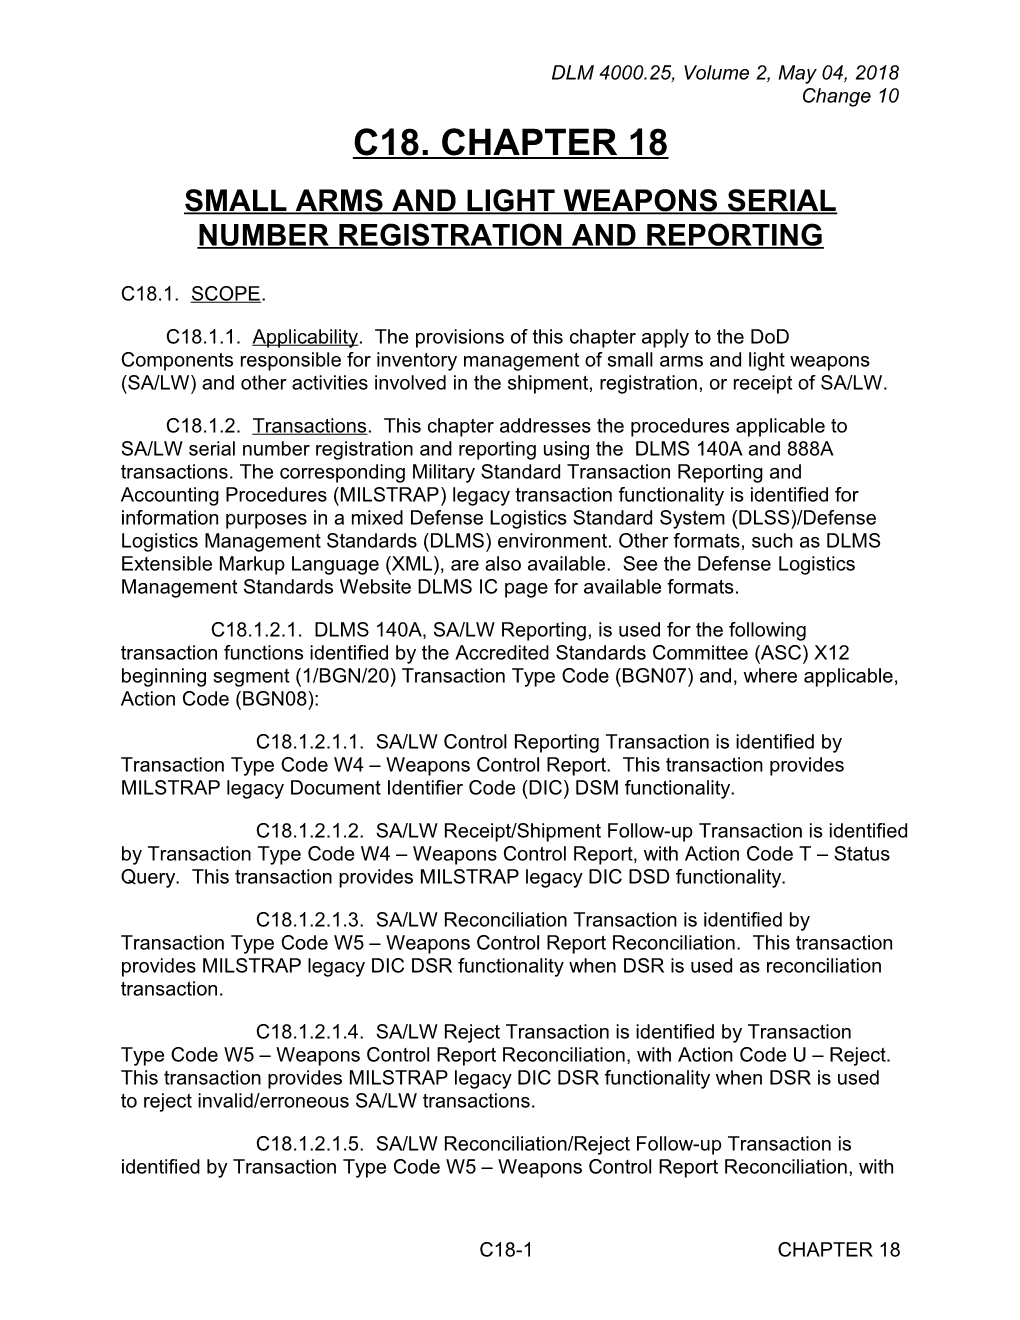 Chapter 18 - Small Arms and Light Weapons Serial Number Registration and Reporting